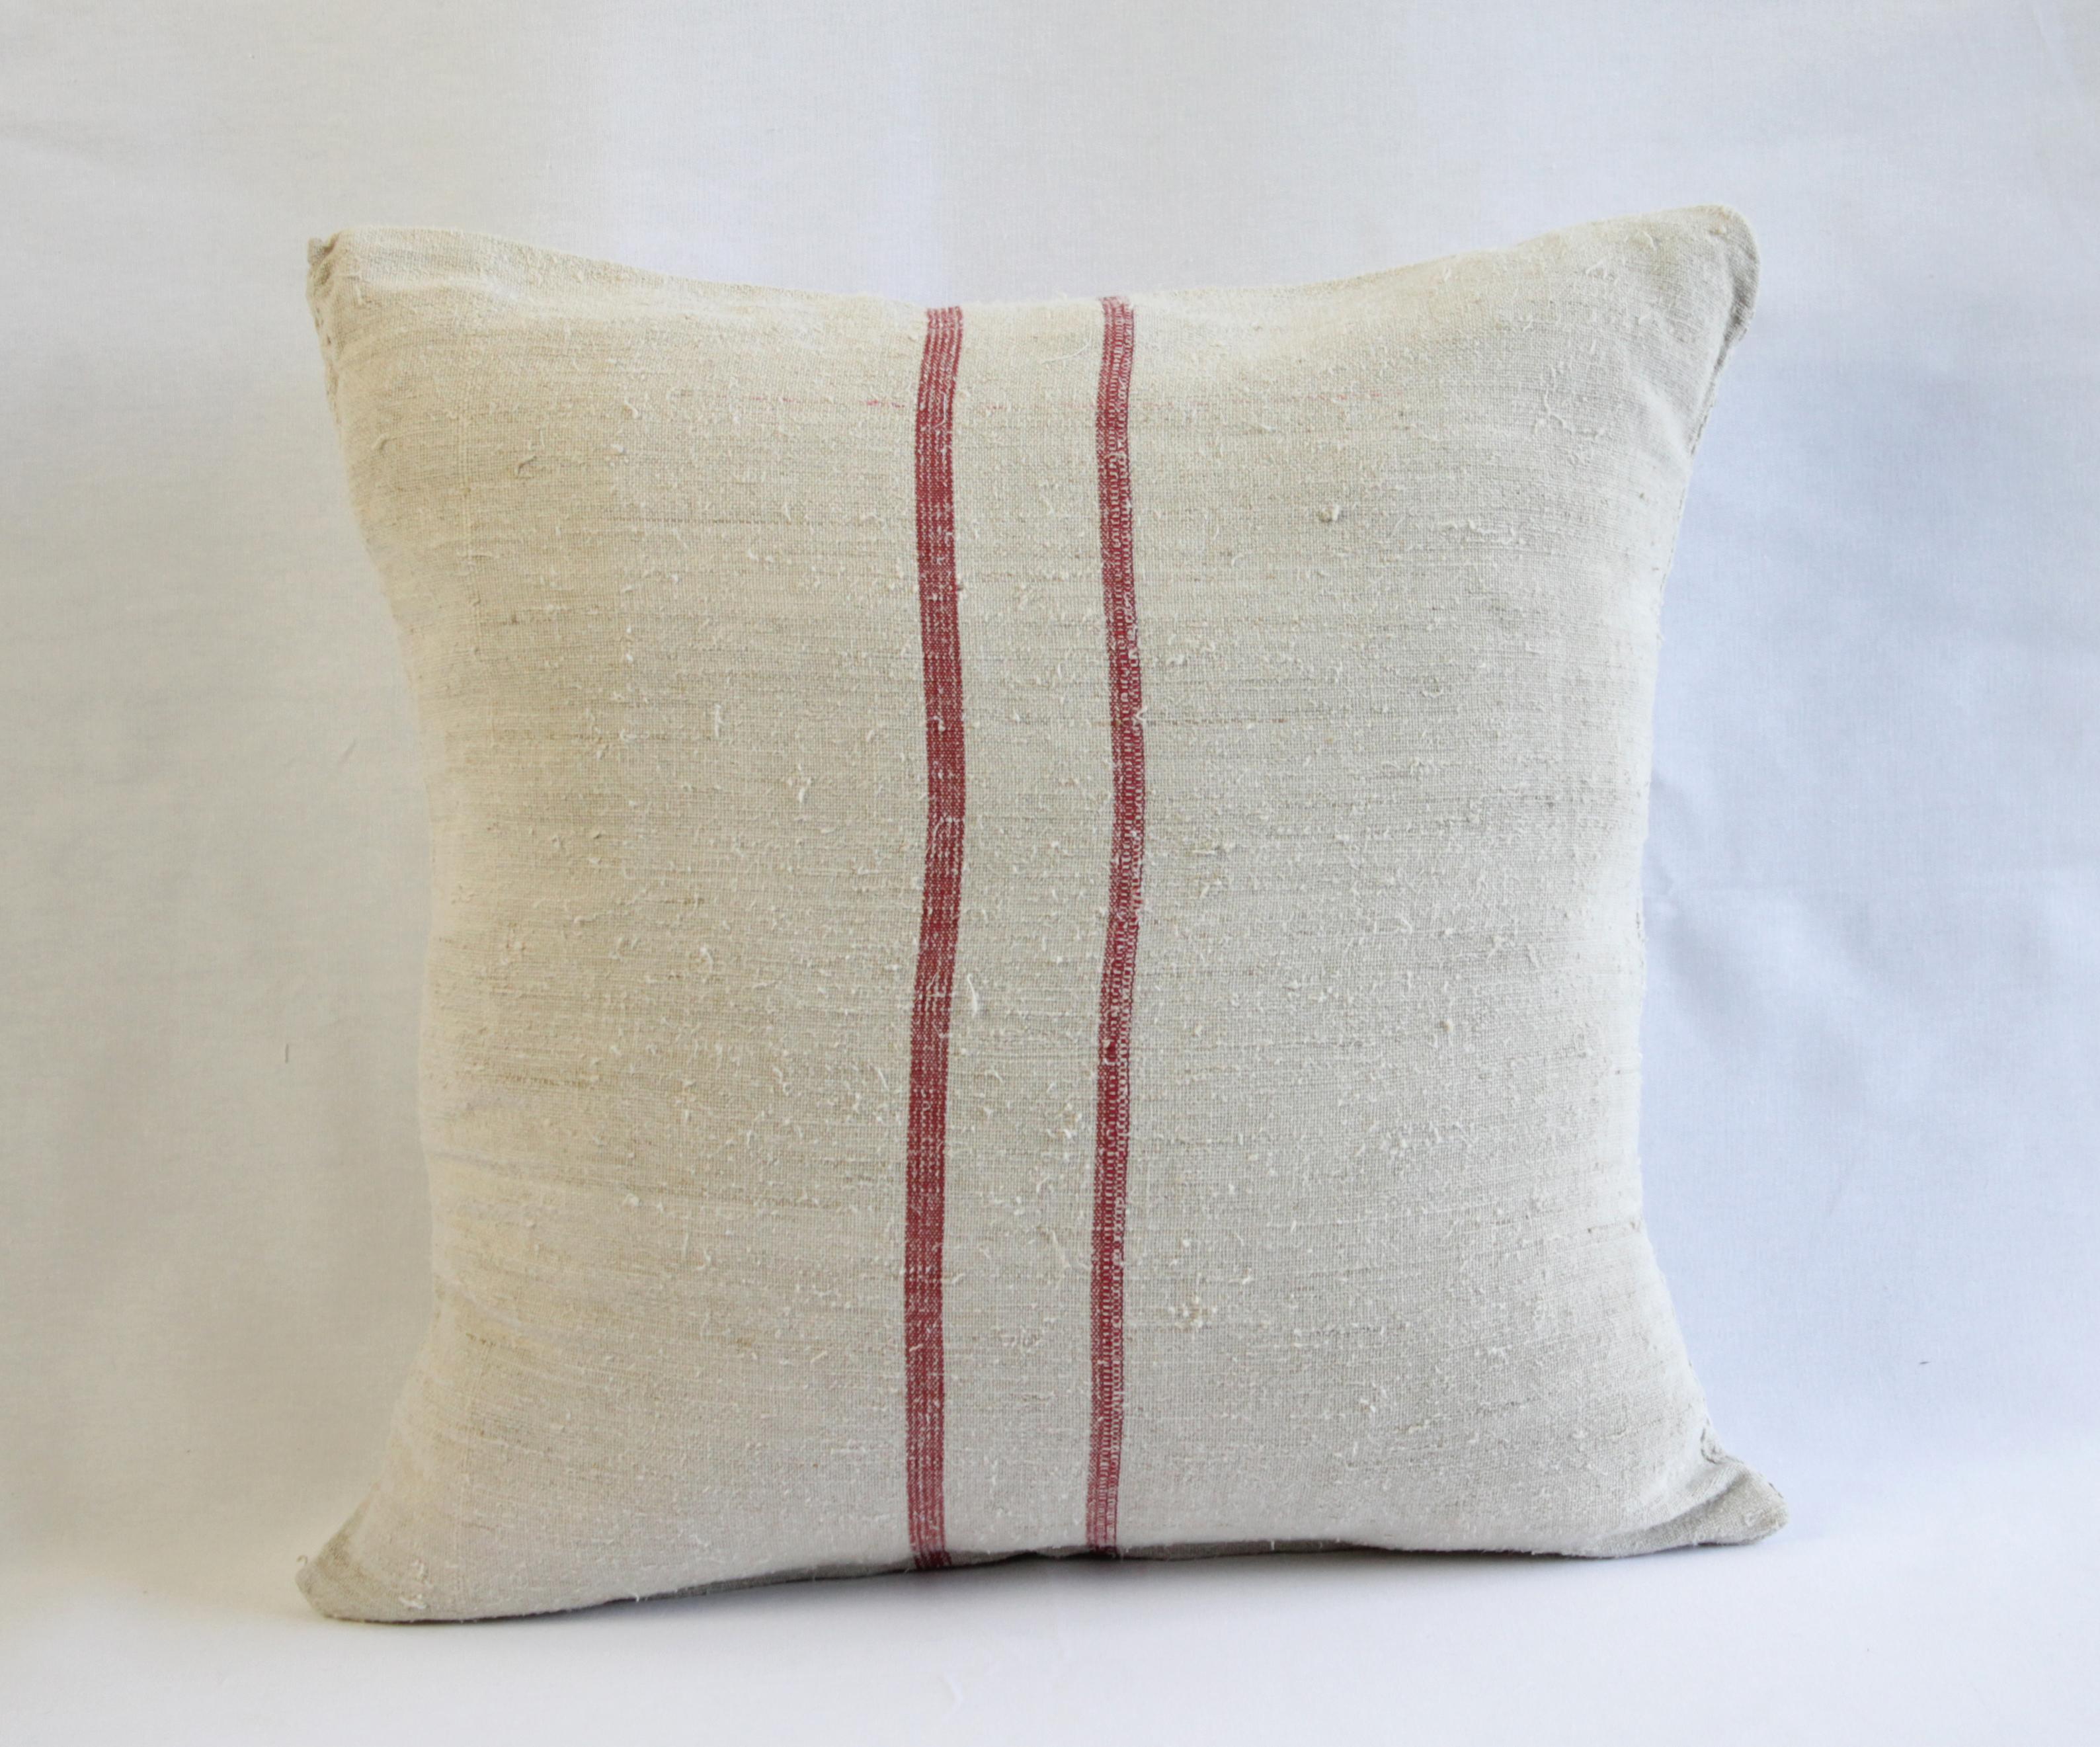 Beautiful pillow made from antique farmers grain sack, circa 1890-1920. These are a light oatmeal color with a red double stripe in the centre. Each pillow is finished with a zipper closure. Front and back are in the same grain sack, and both are